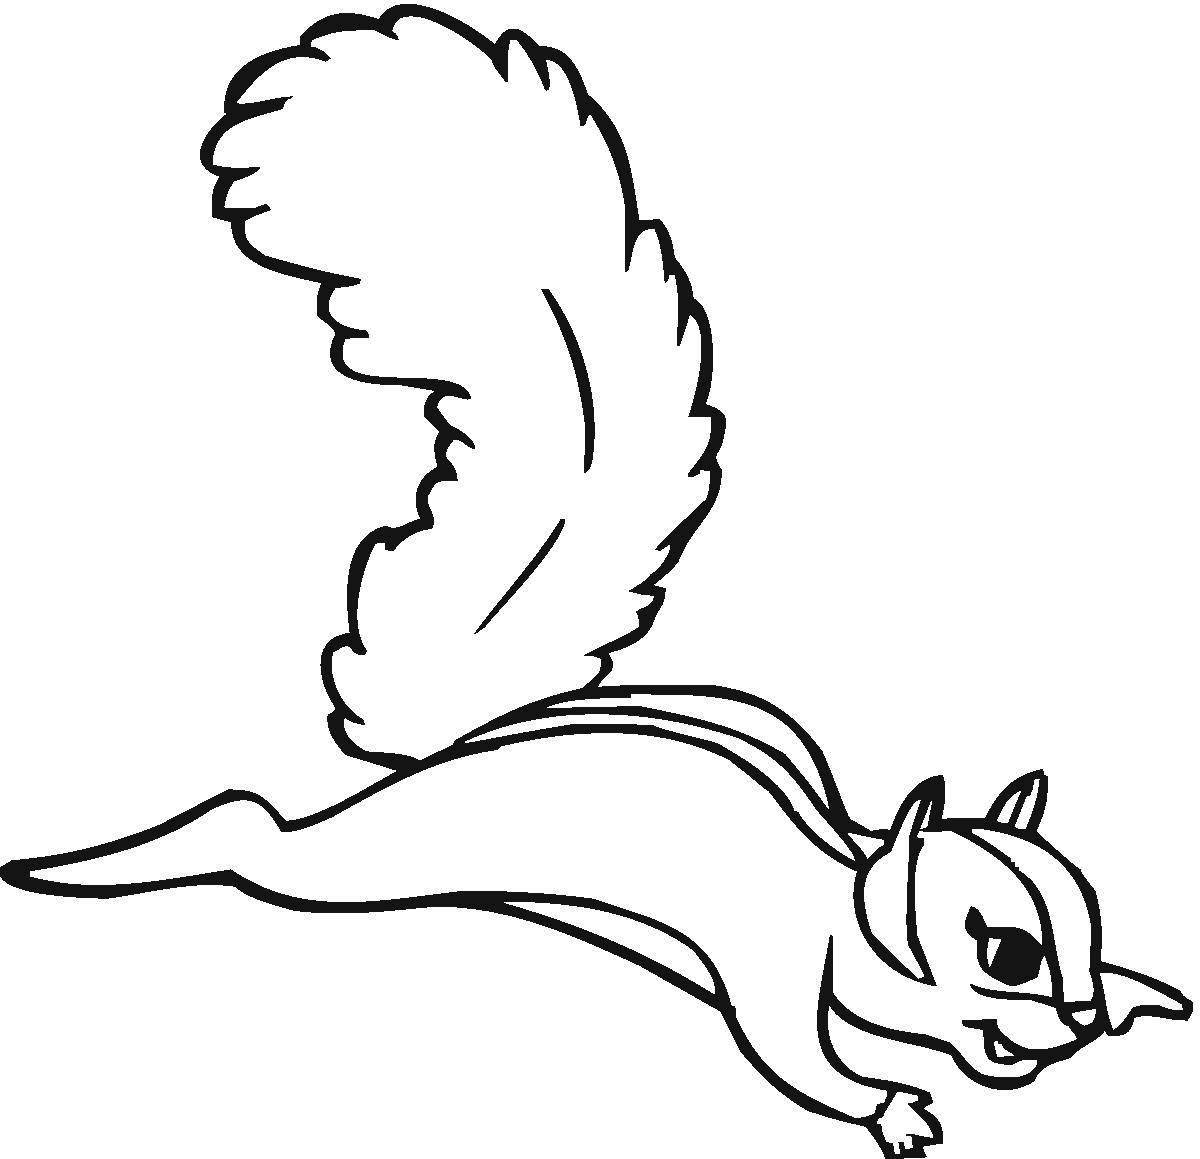 Rampant flying squirrel coloring page